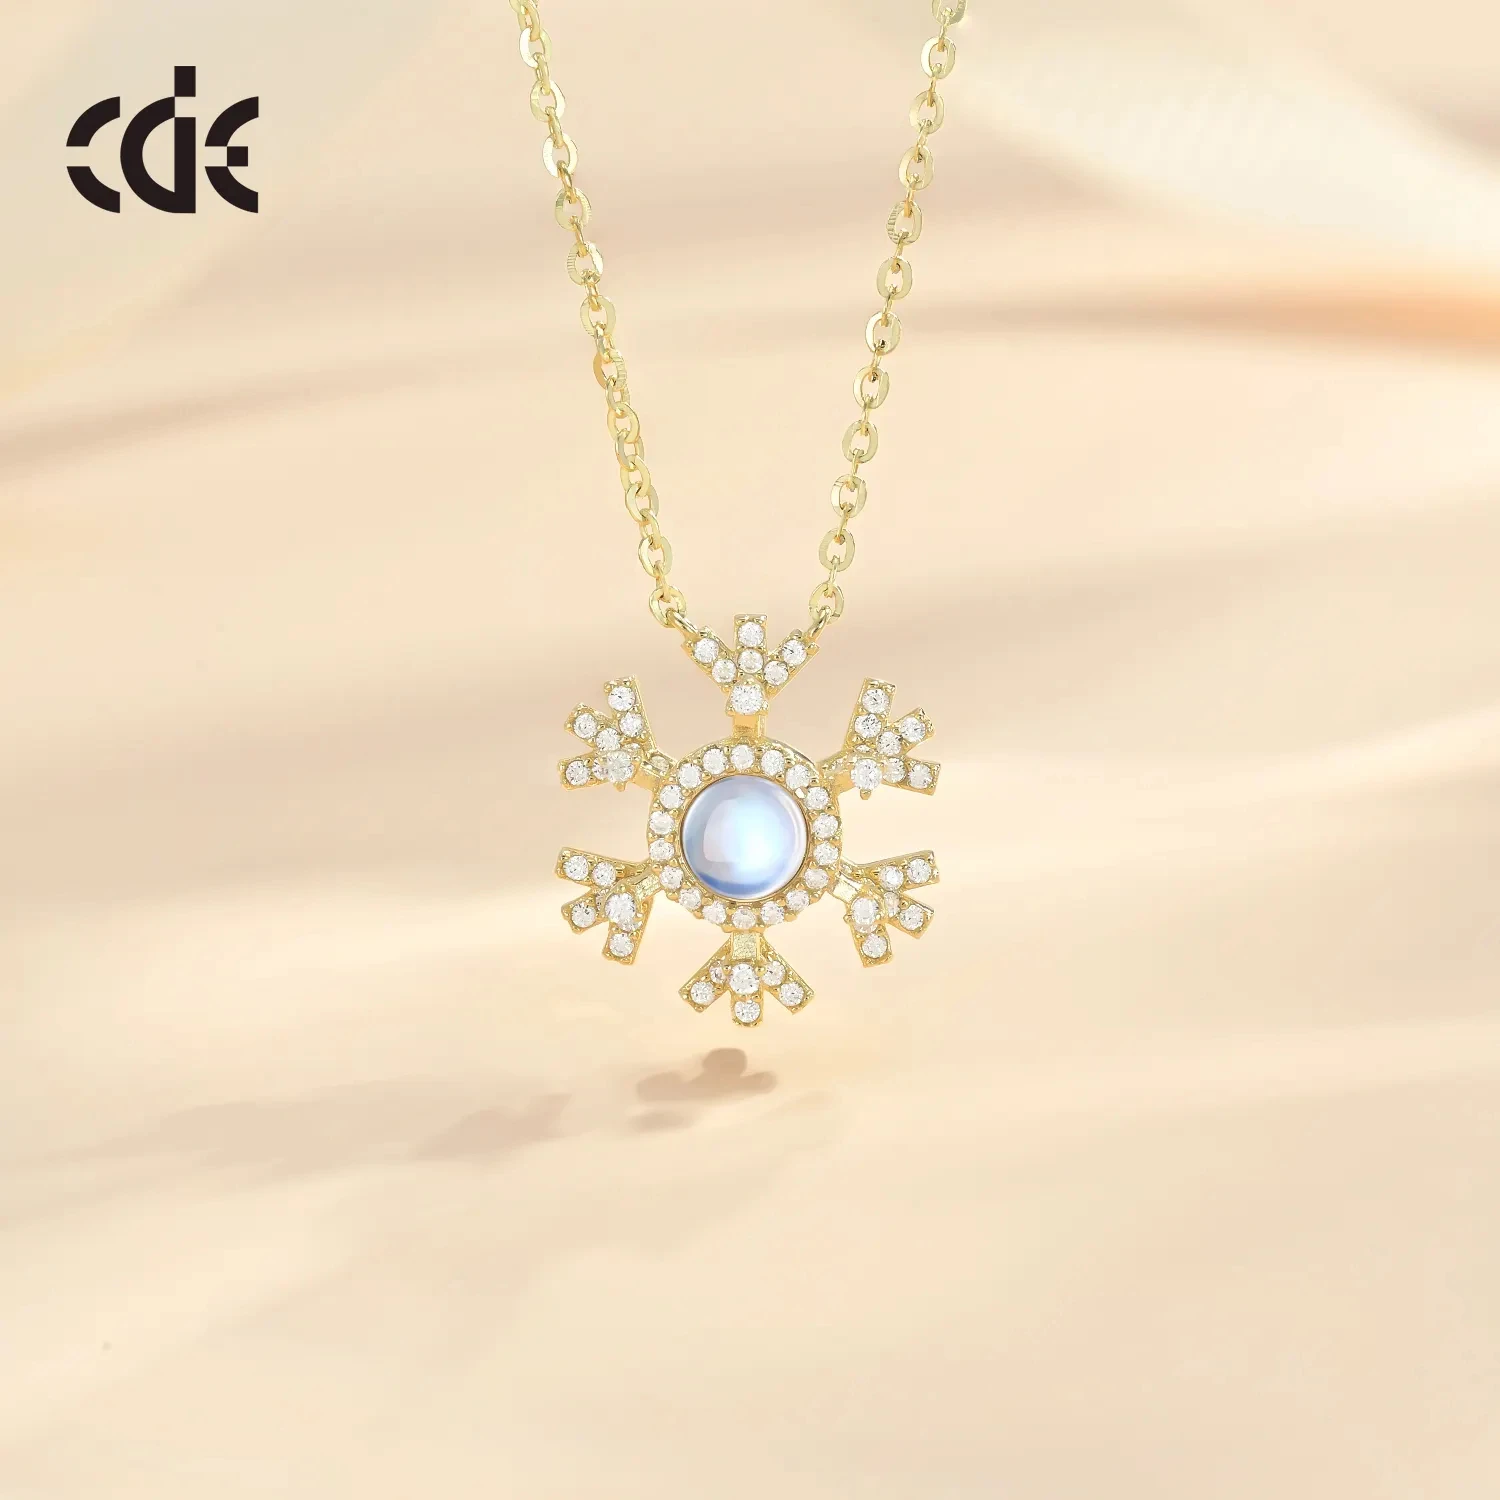 CDE V05987 Fine 925 Sterling Silver Gold Plated Jewelry Tennis Pendant Necklace Wholesale Moonstone Snow Christmas Gift